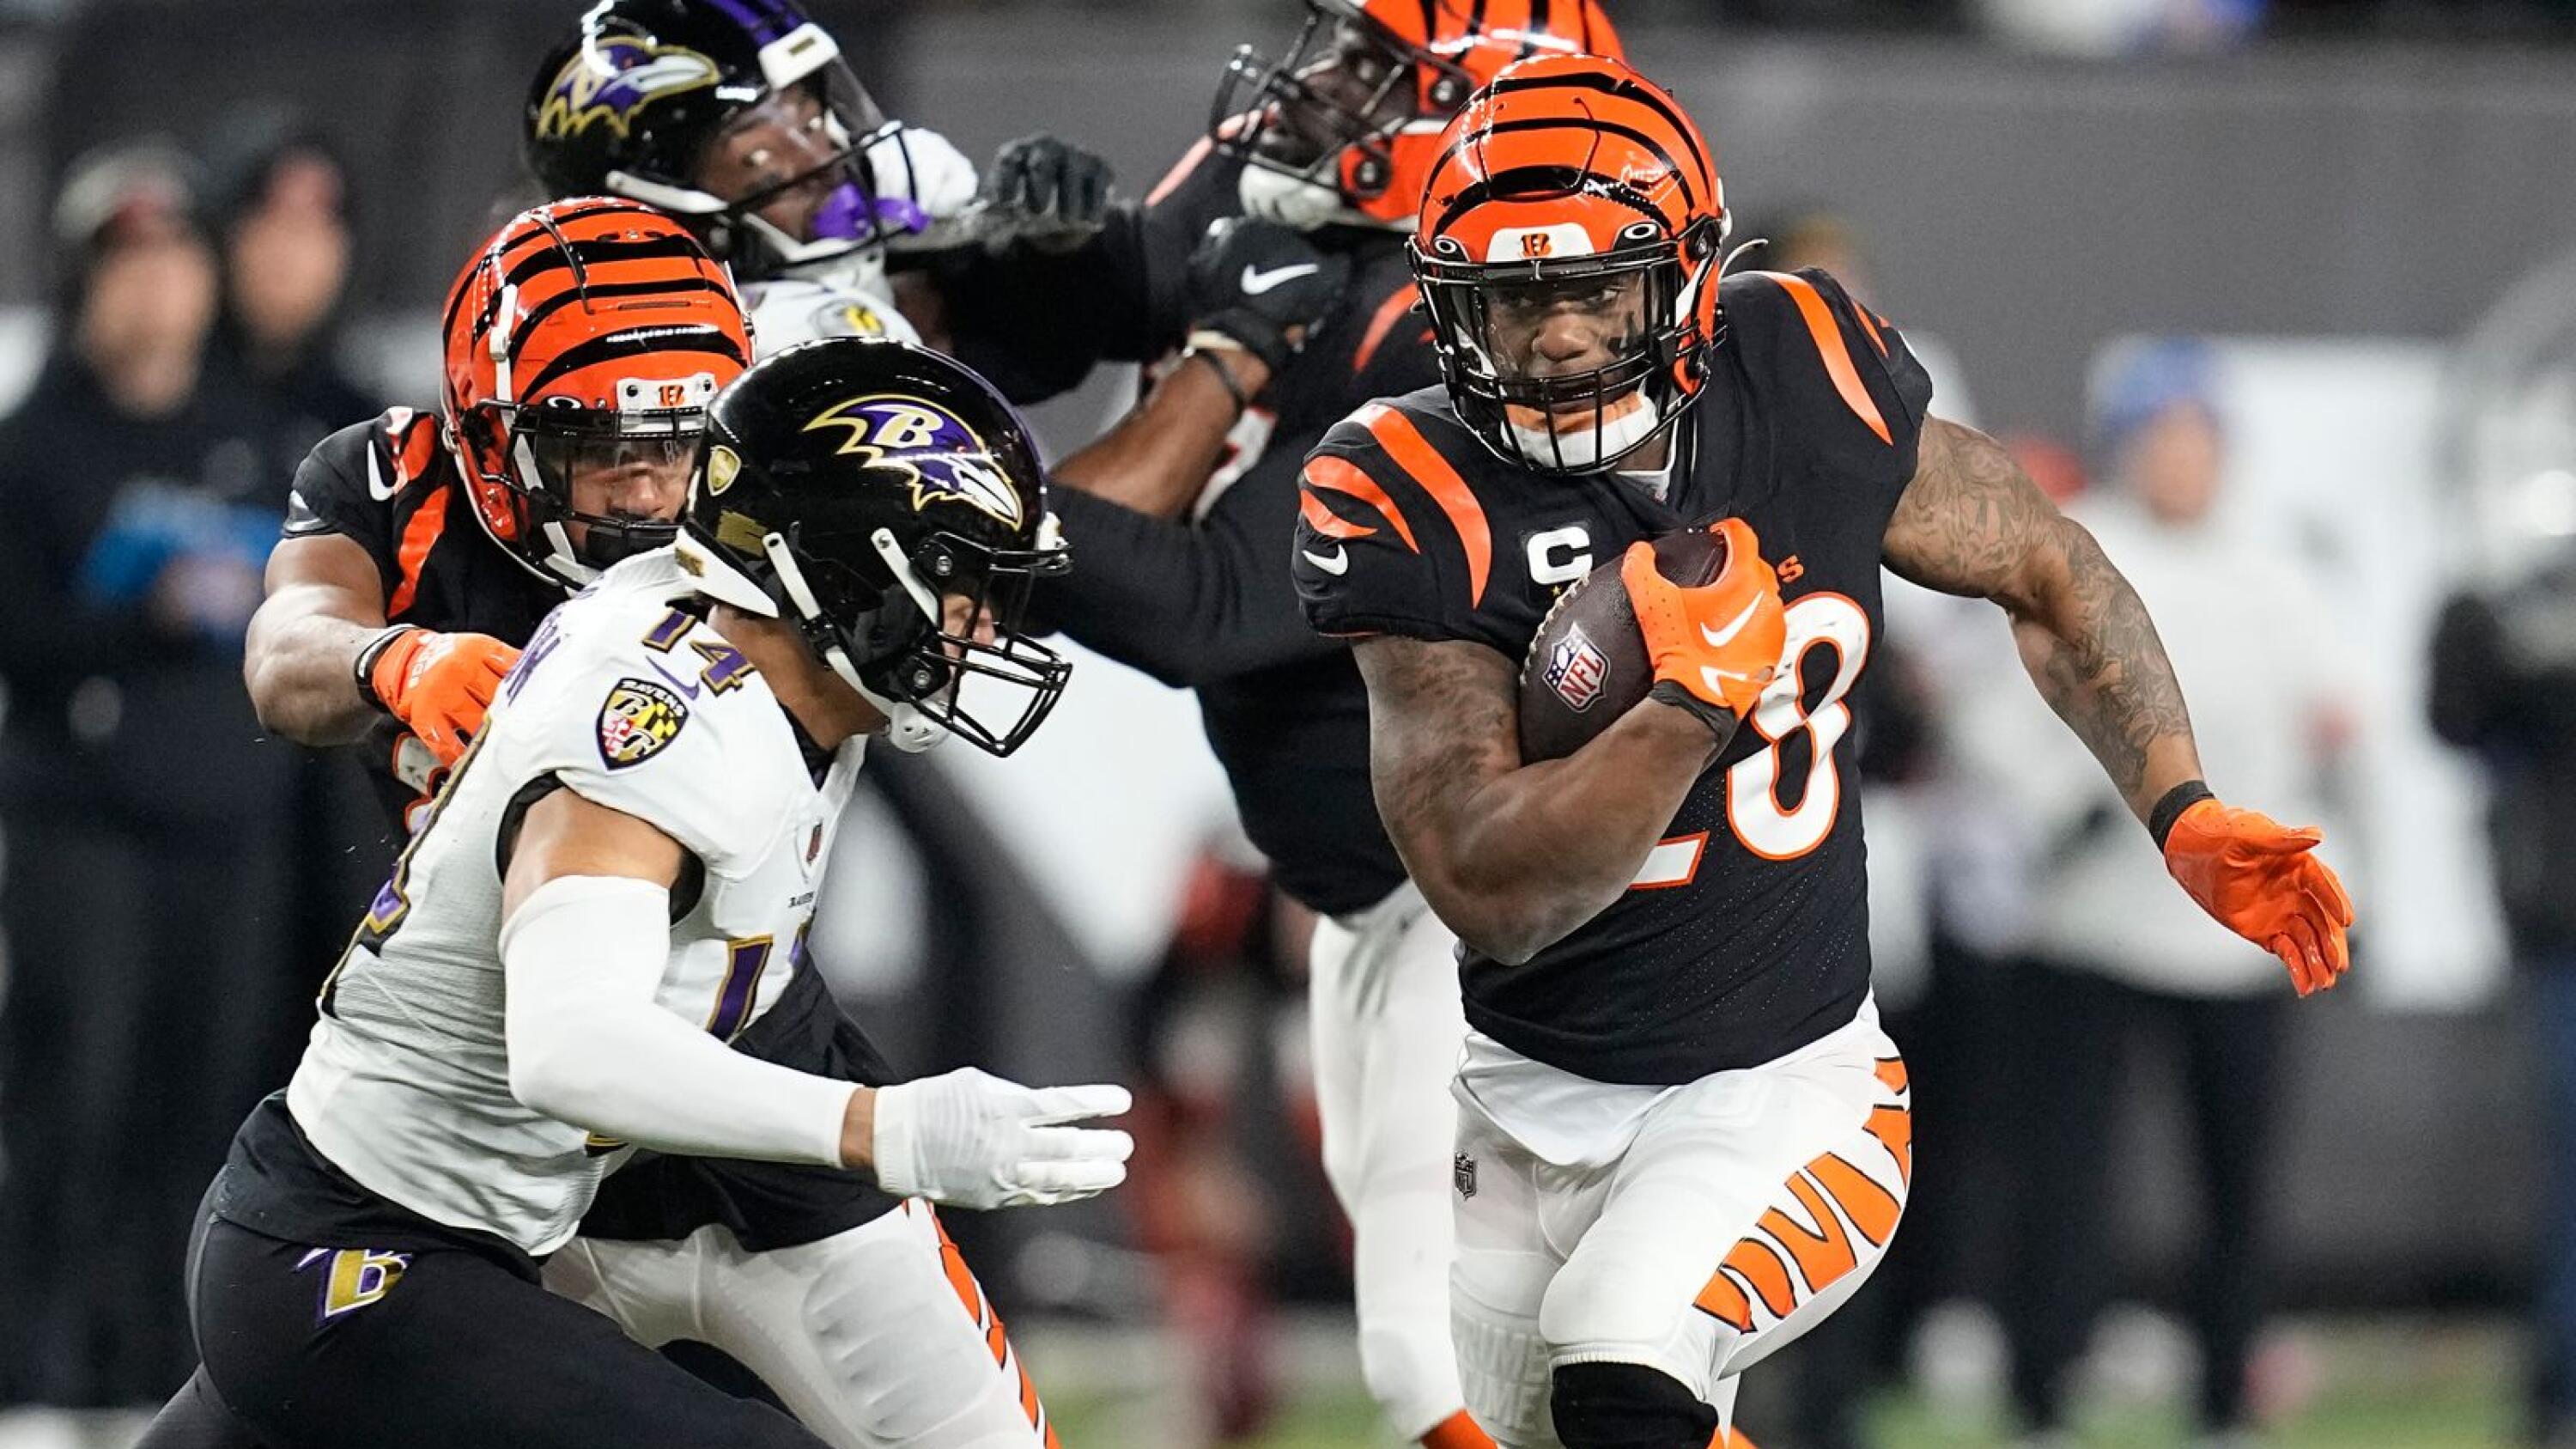 Bengals Offensive Line Gets Disrepsect from PFF